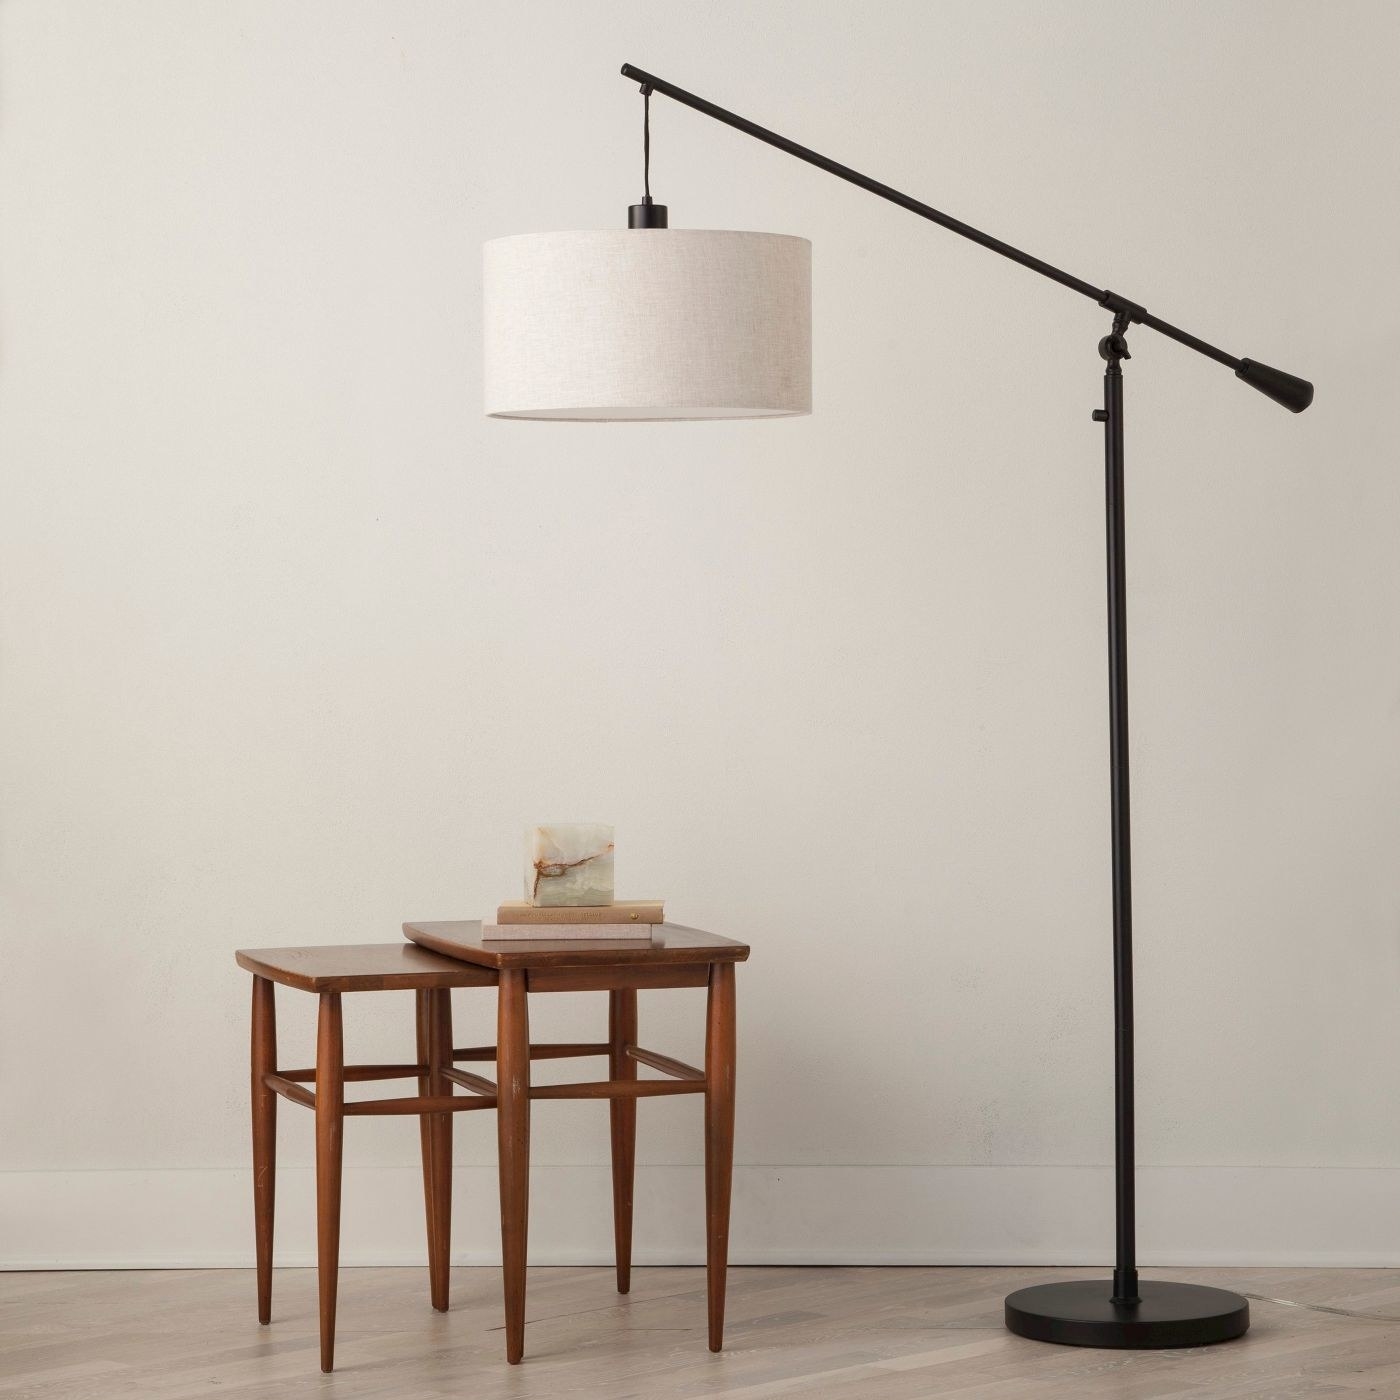 The floor lamp in use 